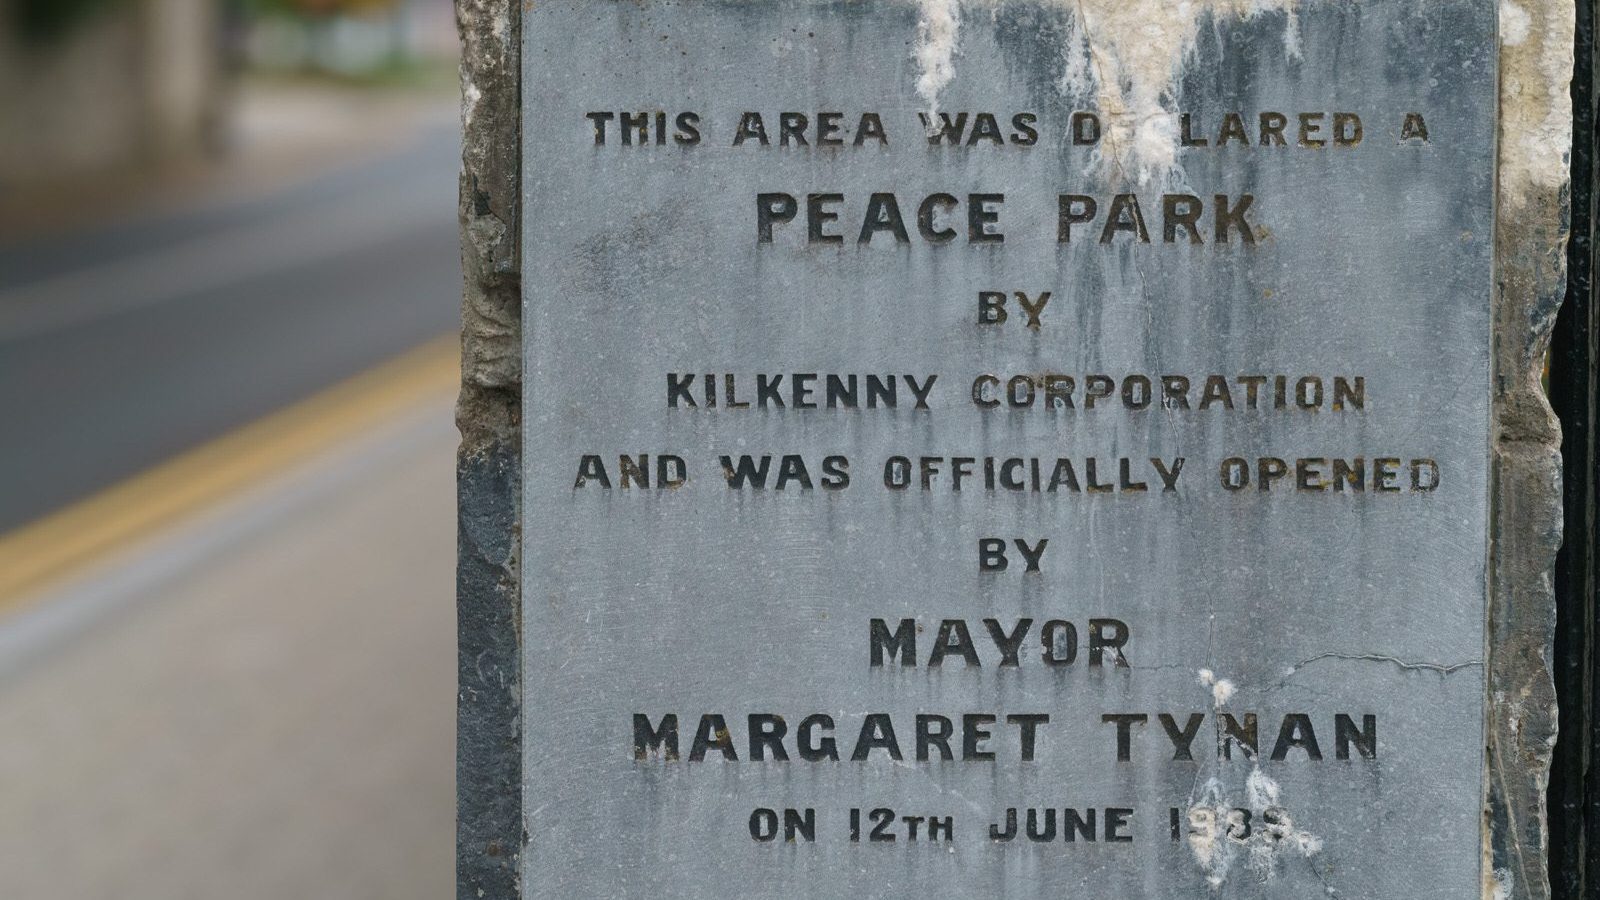 THE FIRST WORLD WAR MEMORIAL UNVEILED IN 2018 AT THE PEACE PARK IN KILKENNY [ALSO THE STORY OF 14 YEAR OLD THOMAS WOODGATE]-226802-1